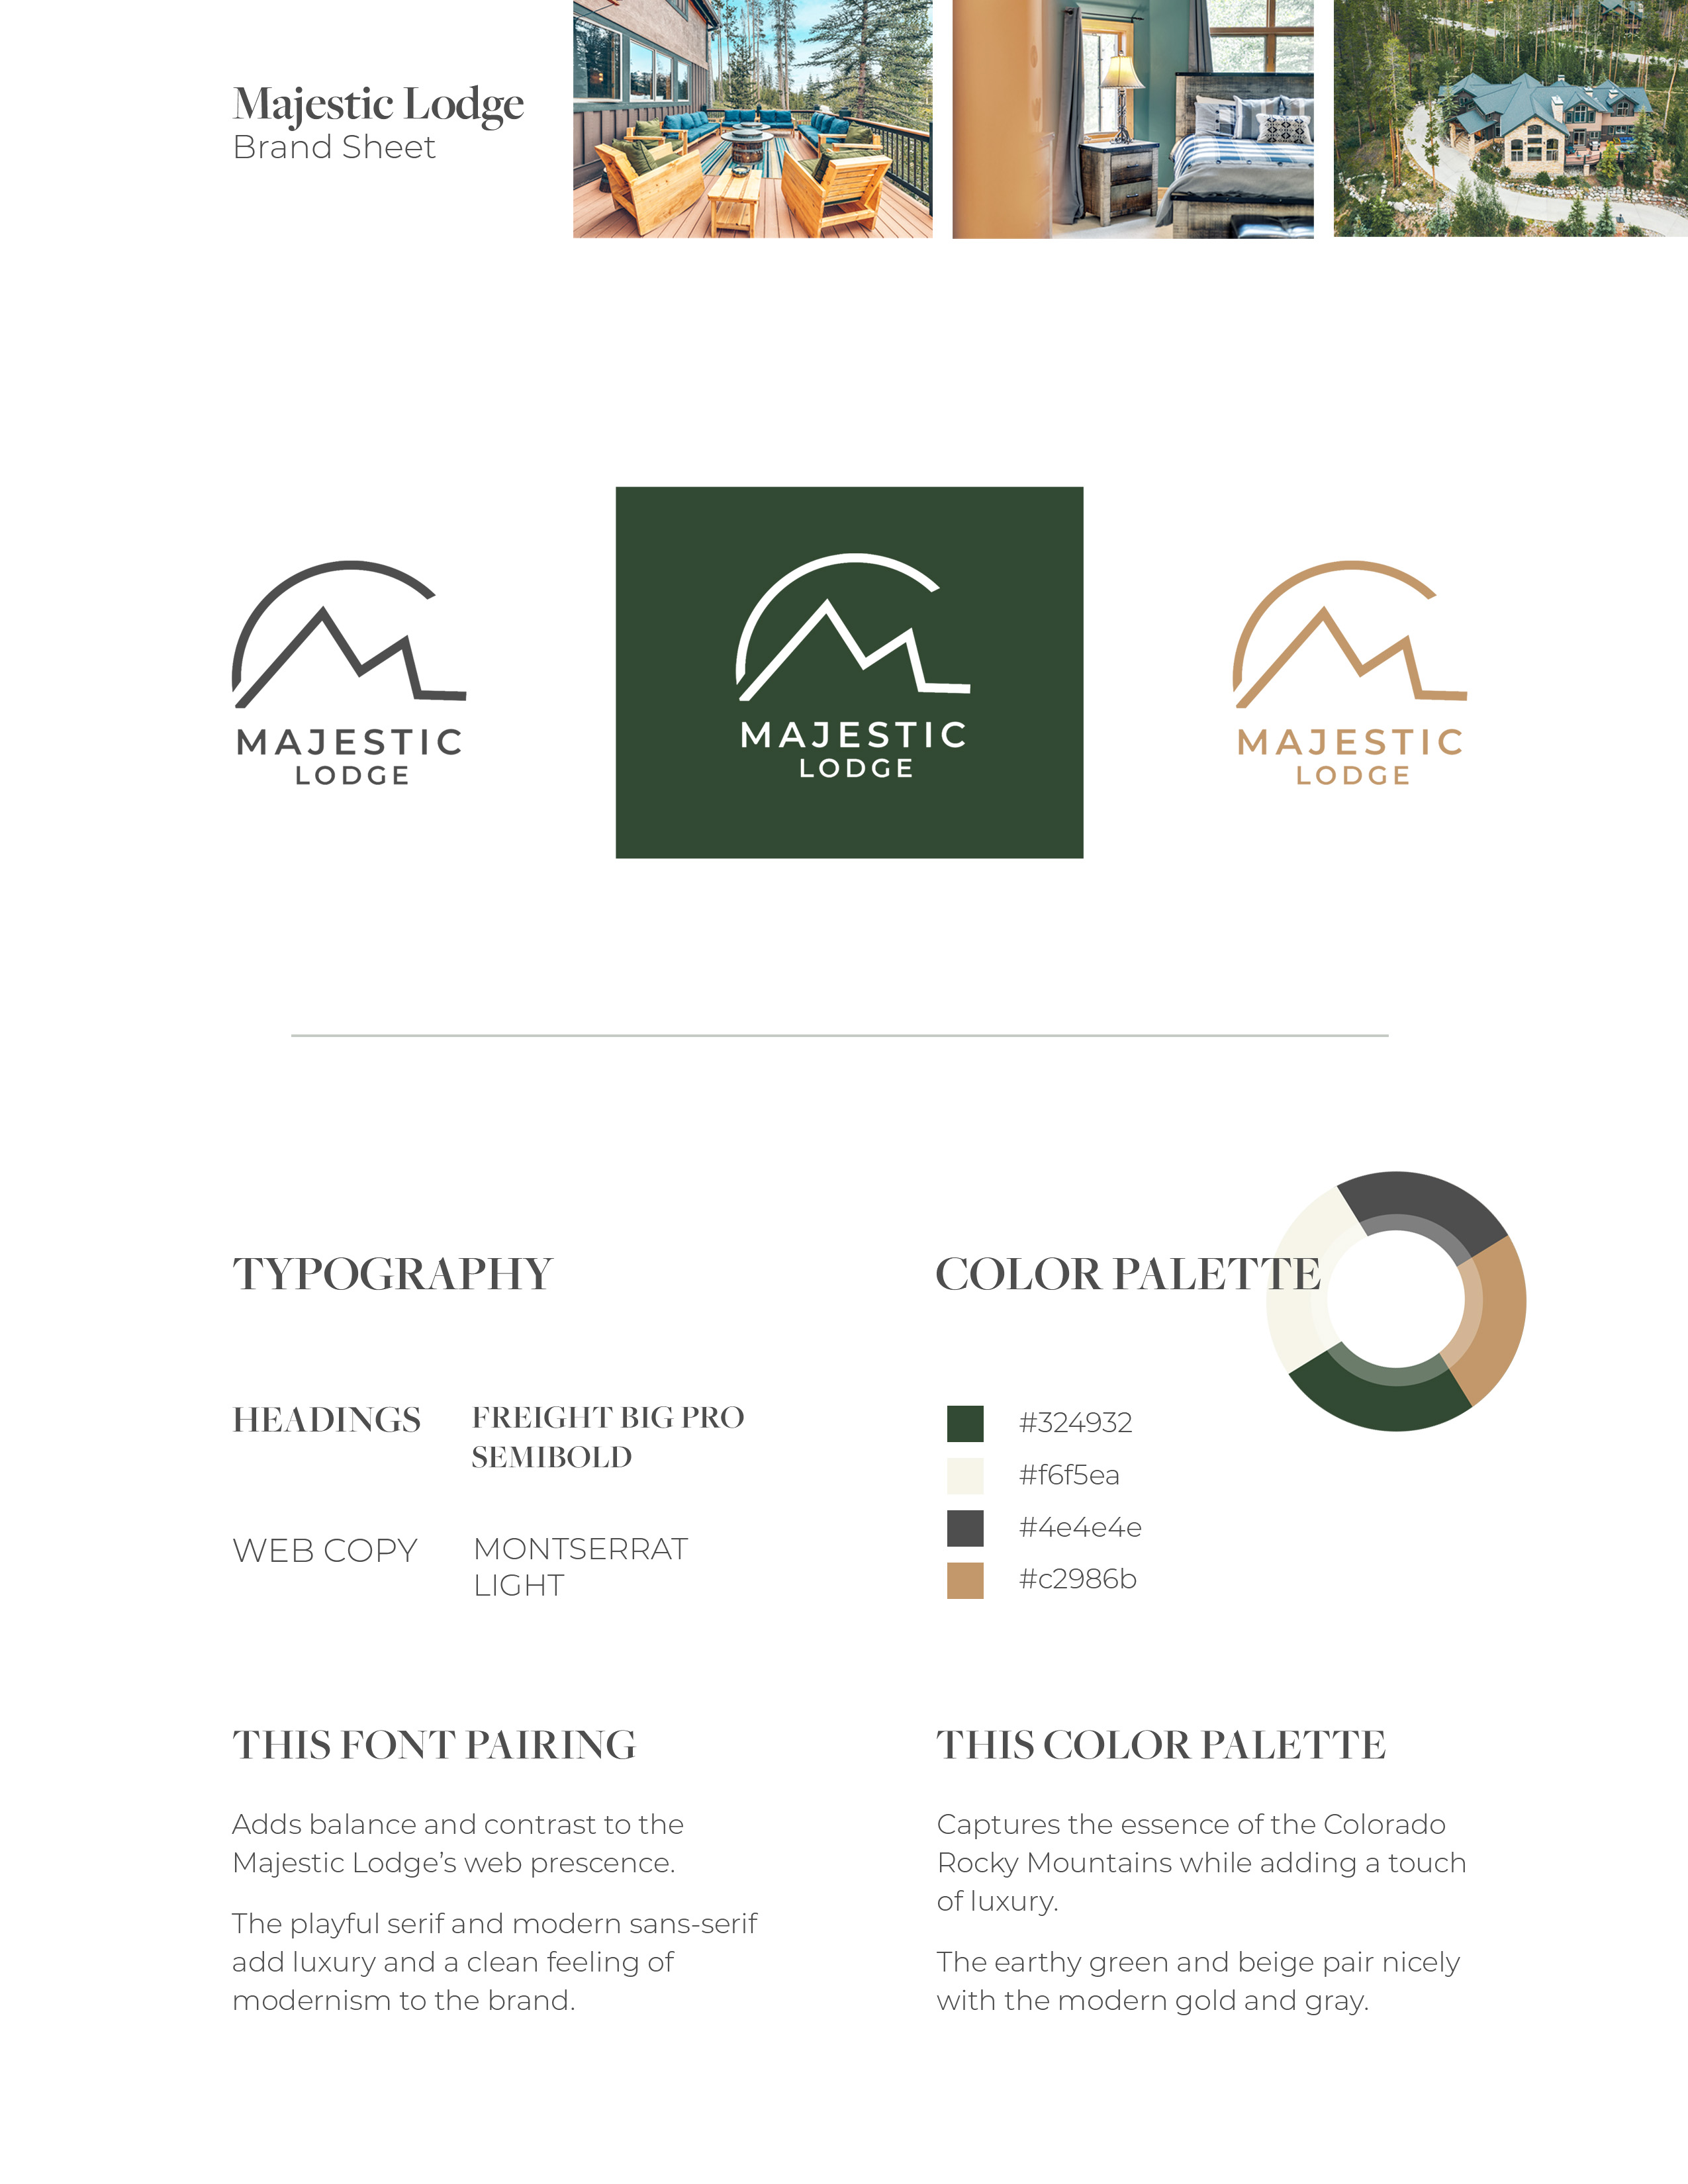 A brand sheet showing the client's new colors, typefaces, and logos.